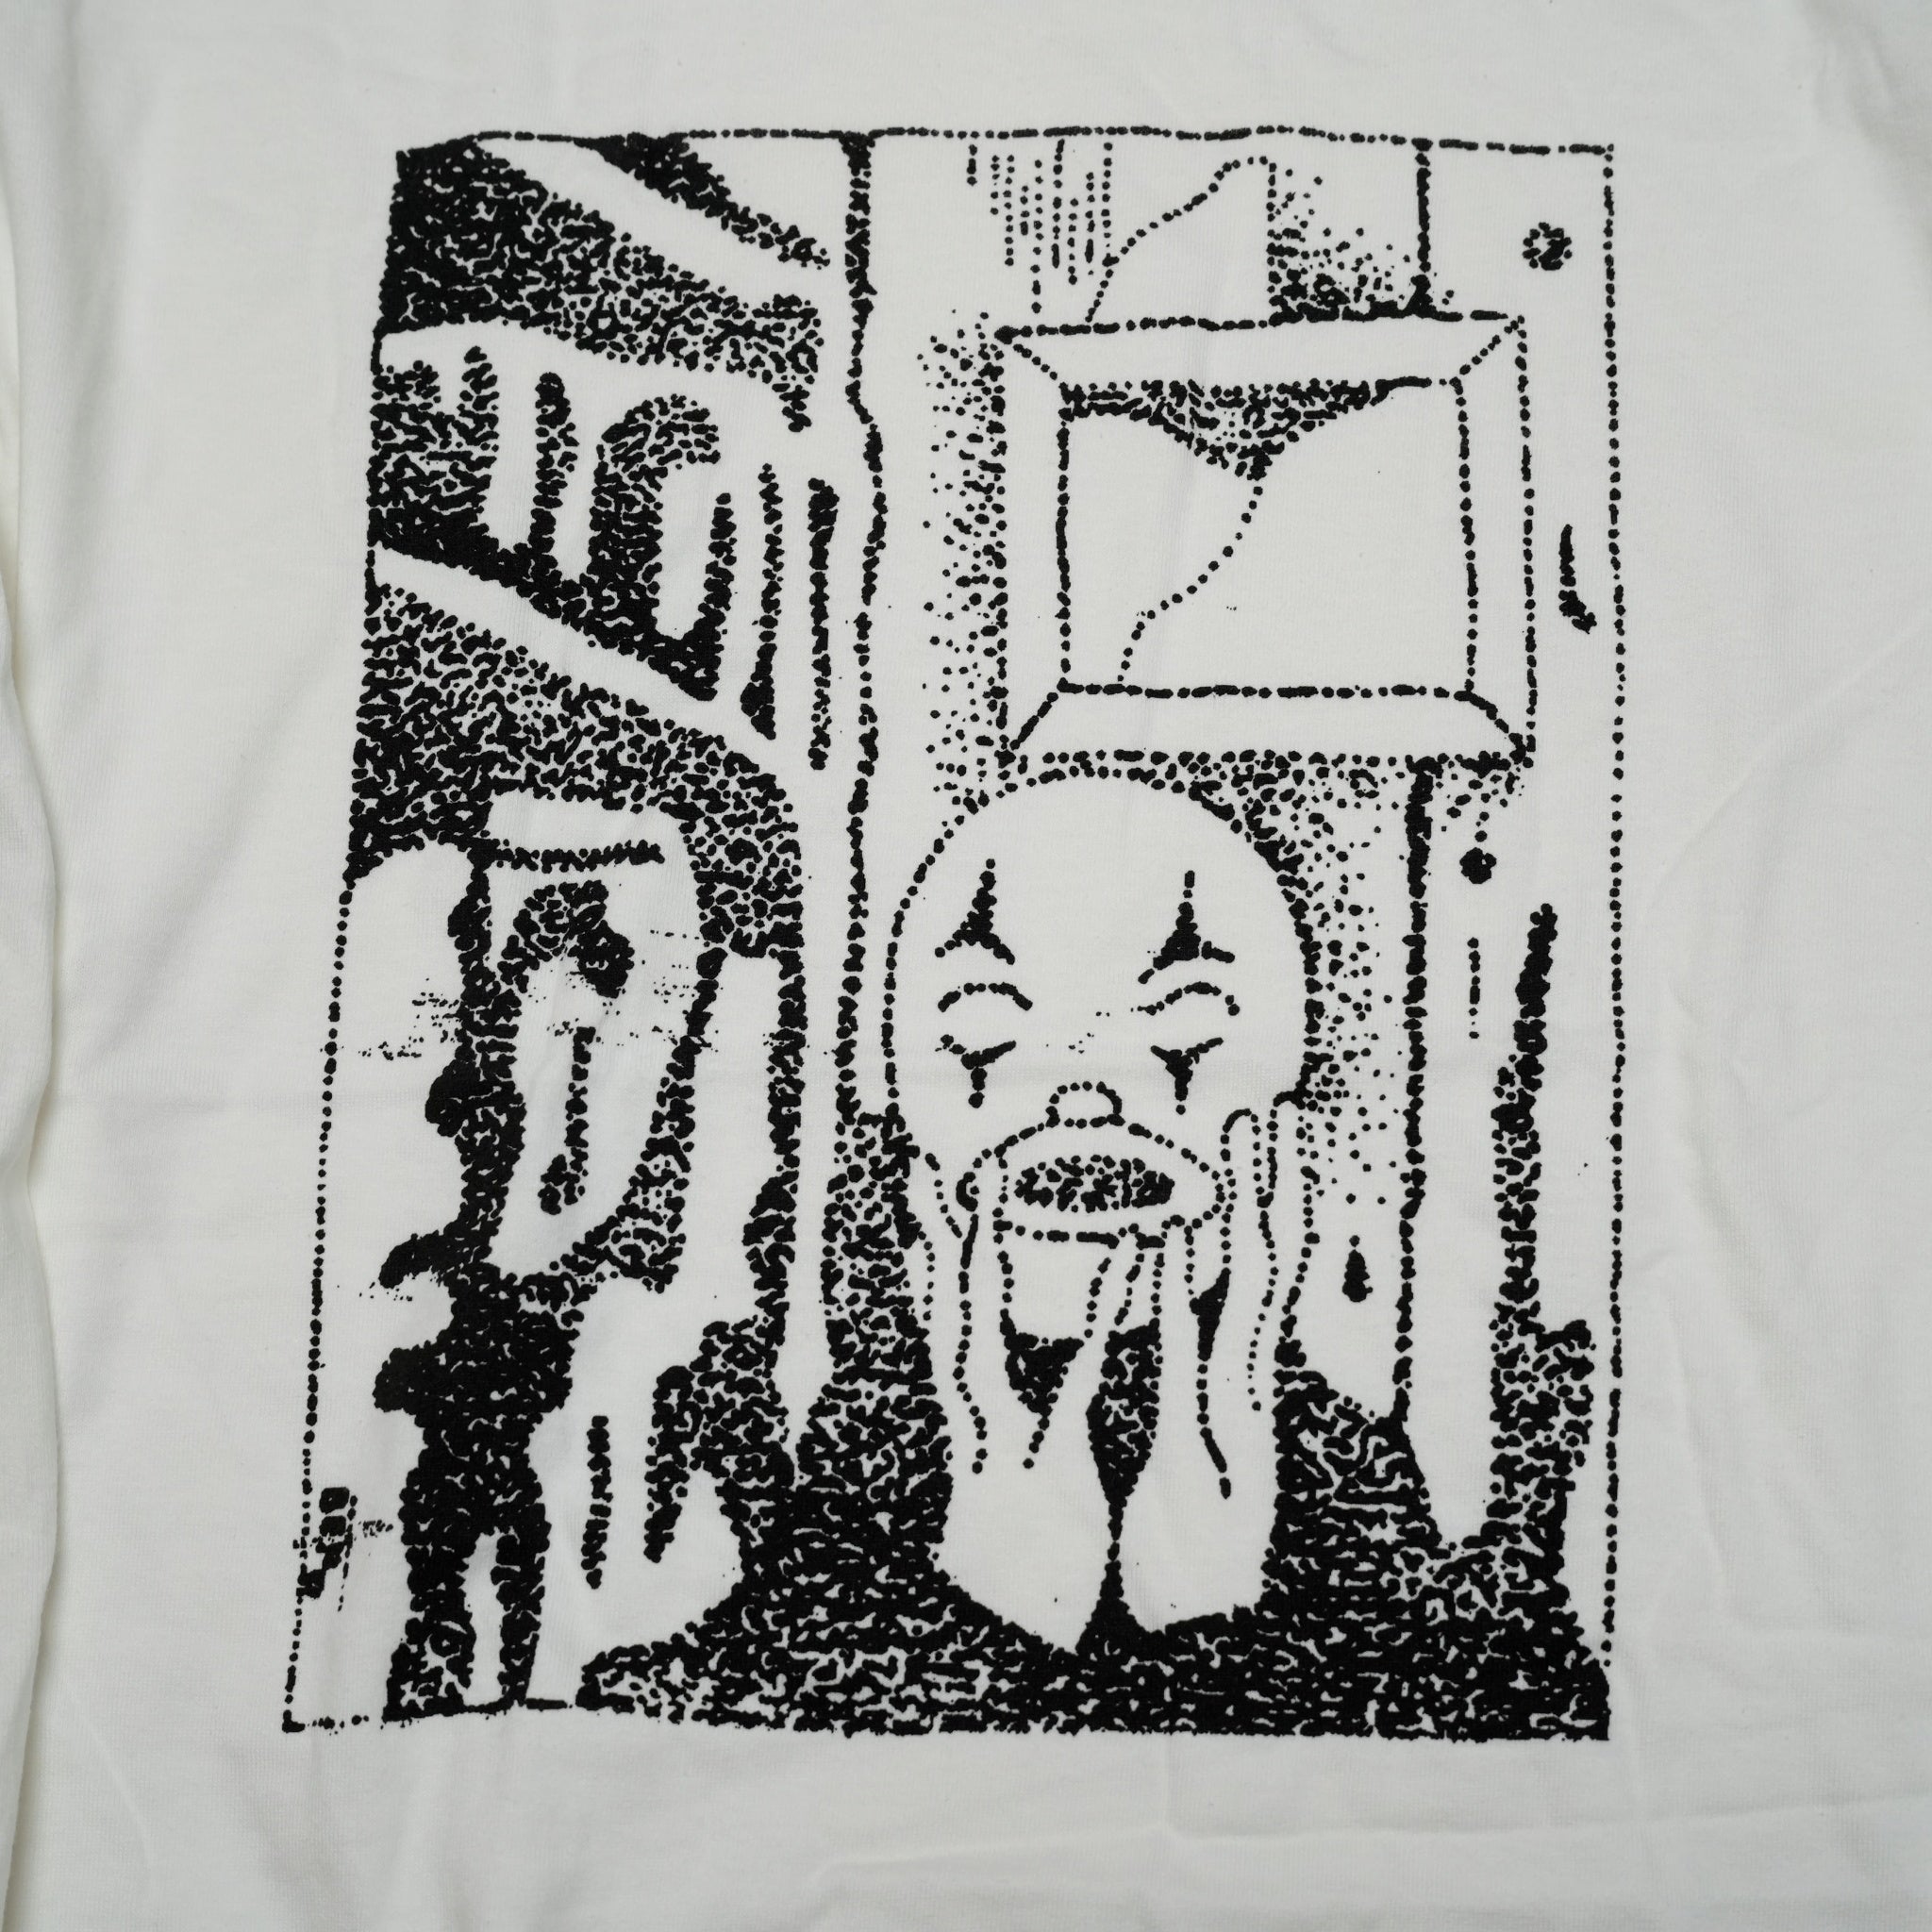 MGMT Little Dark Age [WHITE] L/S T-shirt【Kung Fu Inc】